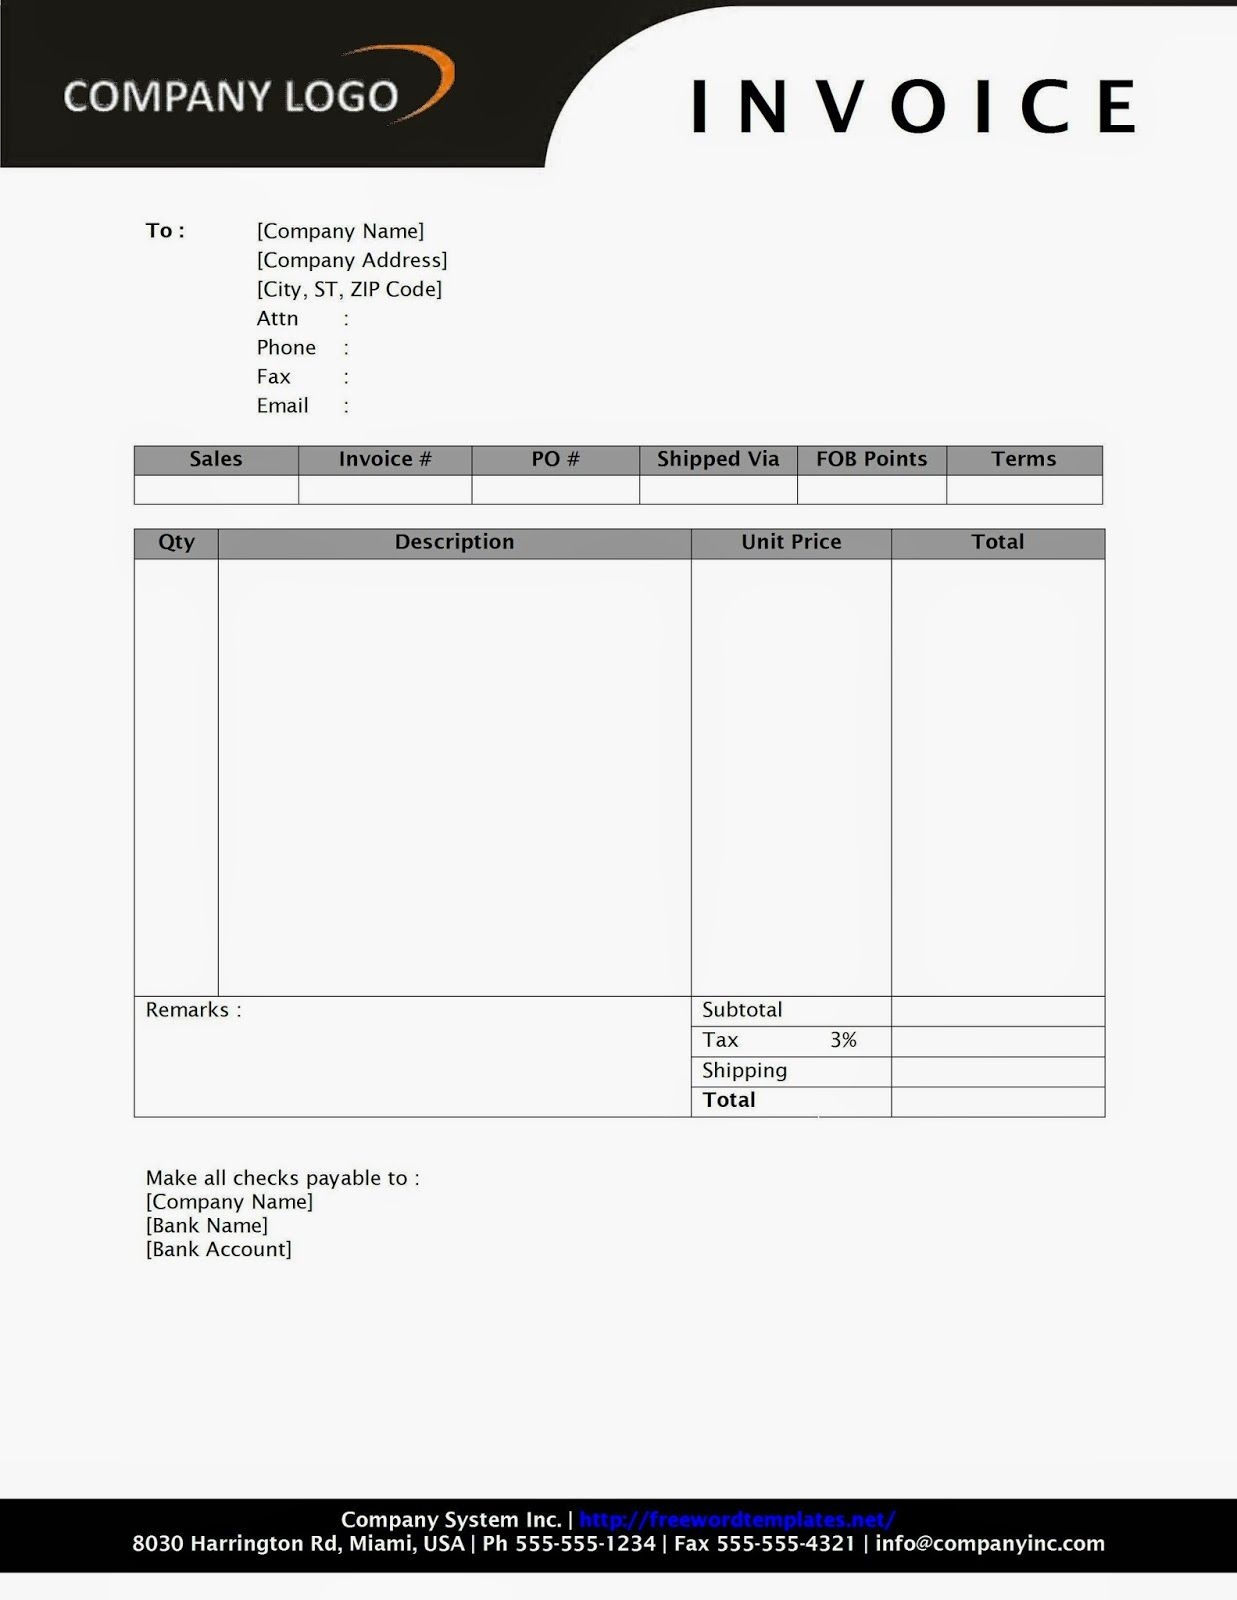 sales invoice sd1 style invoice template word microsoft sales invoice template microsoft word